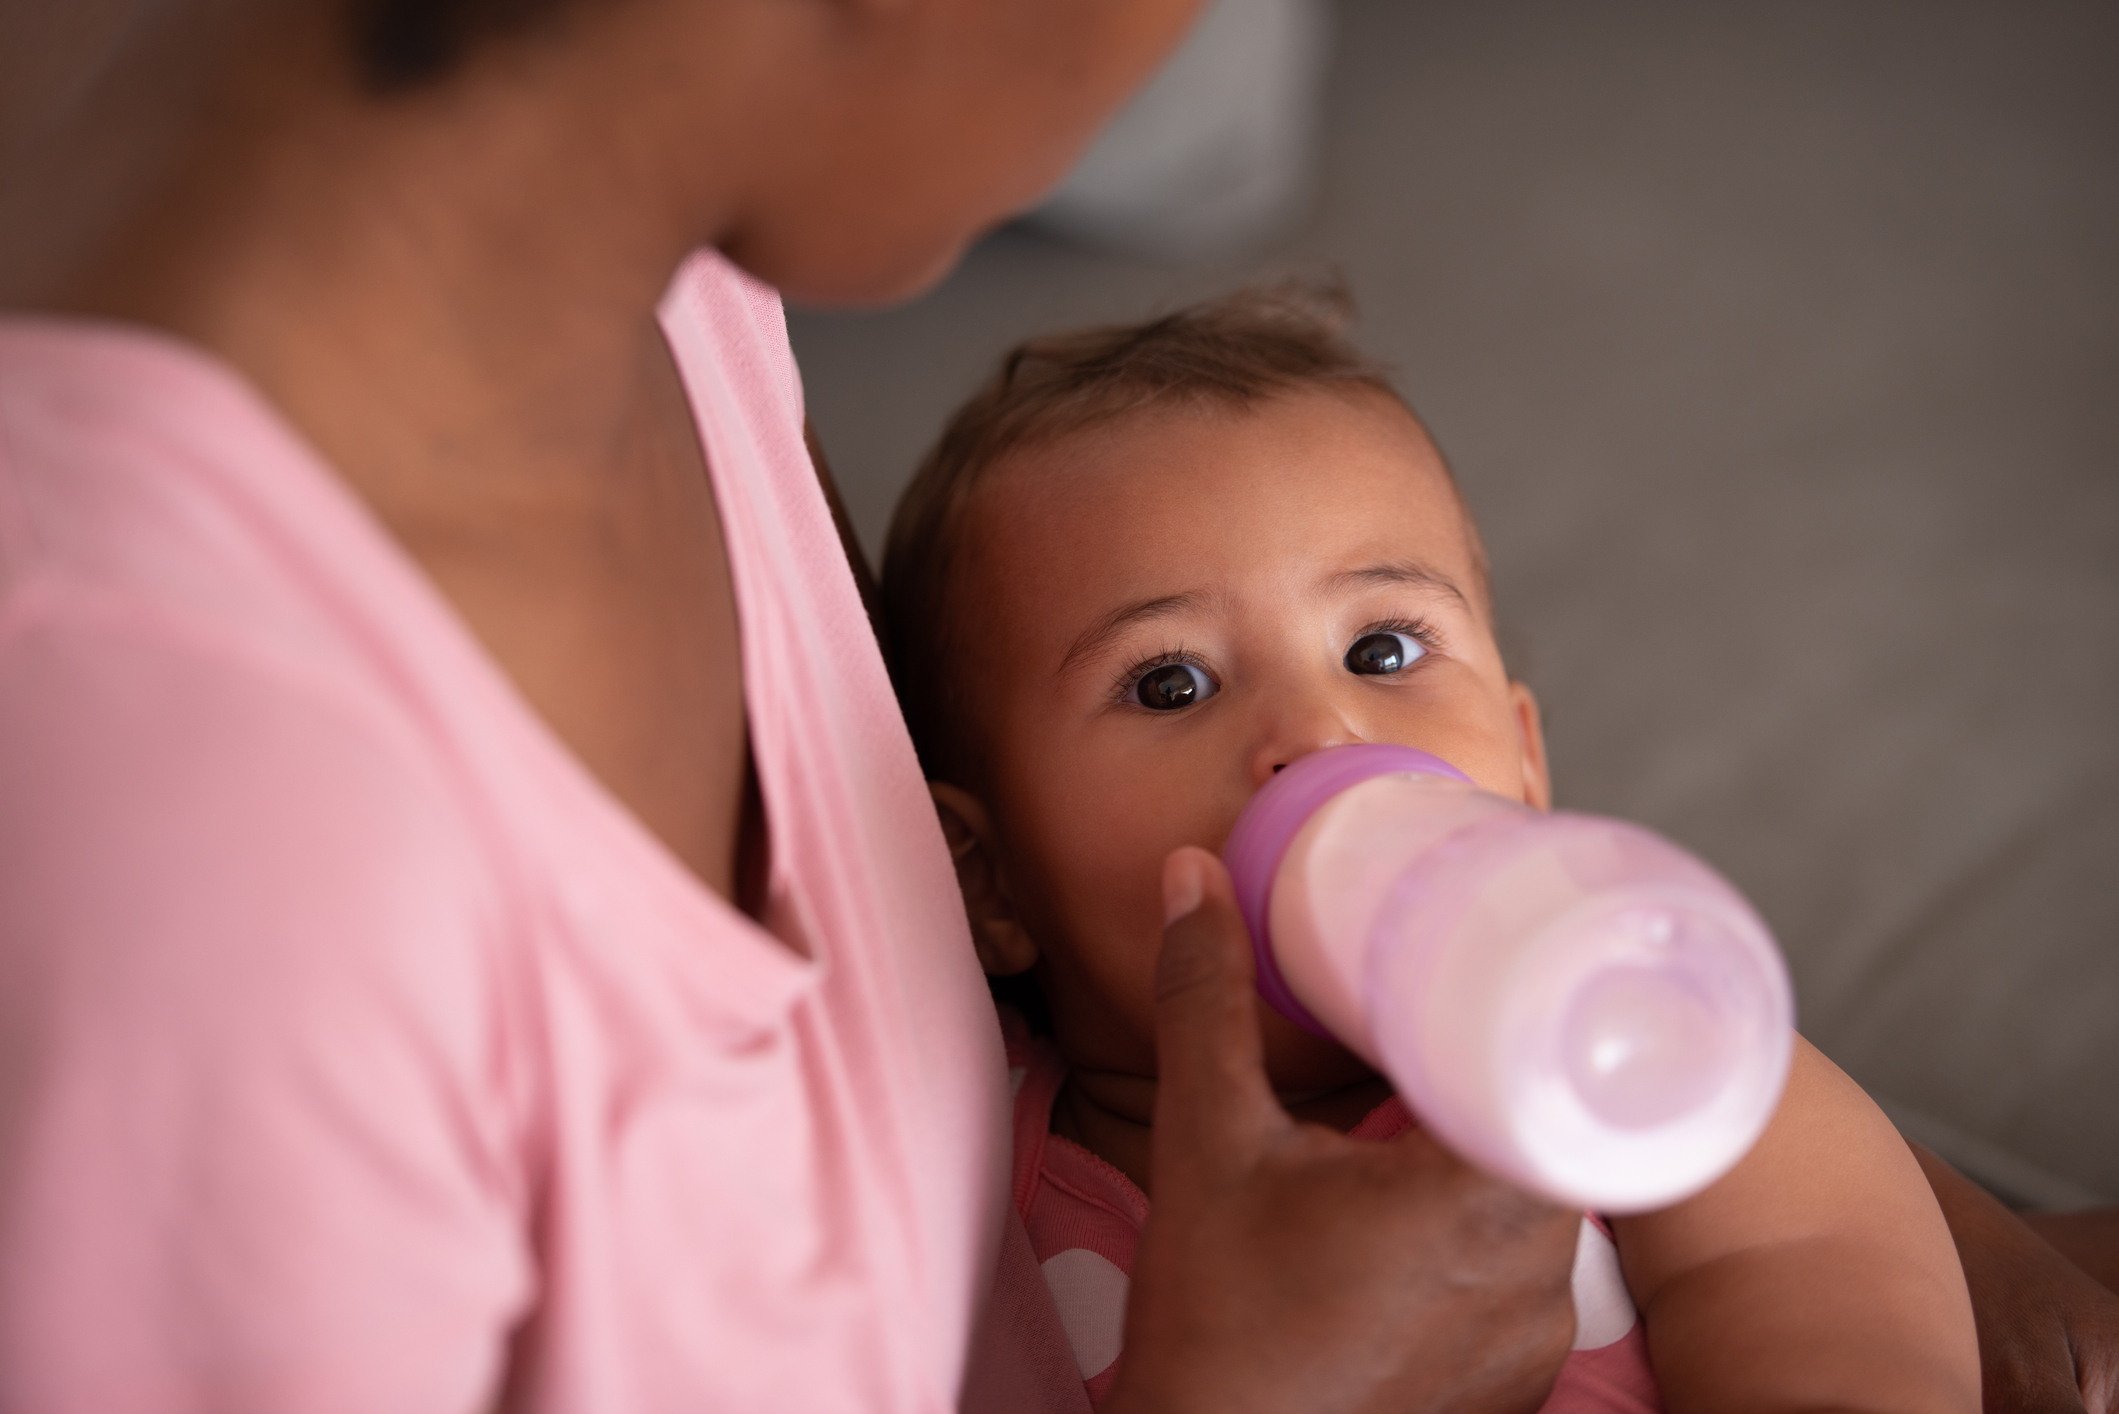 What bottles and teats do you need for babies?